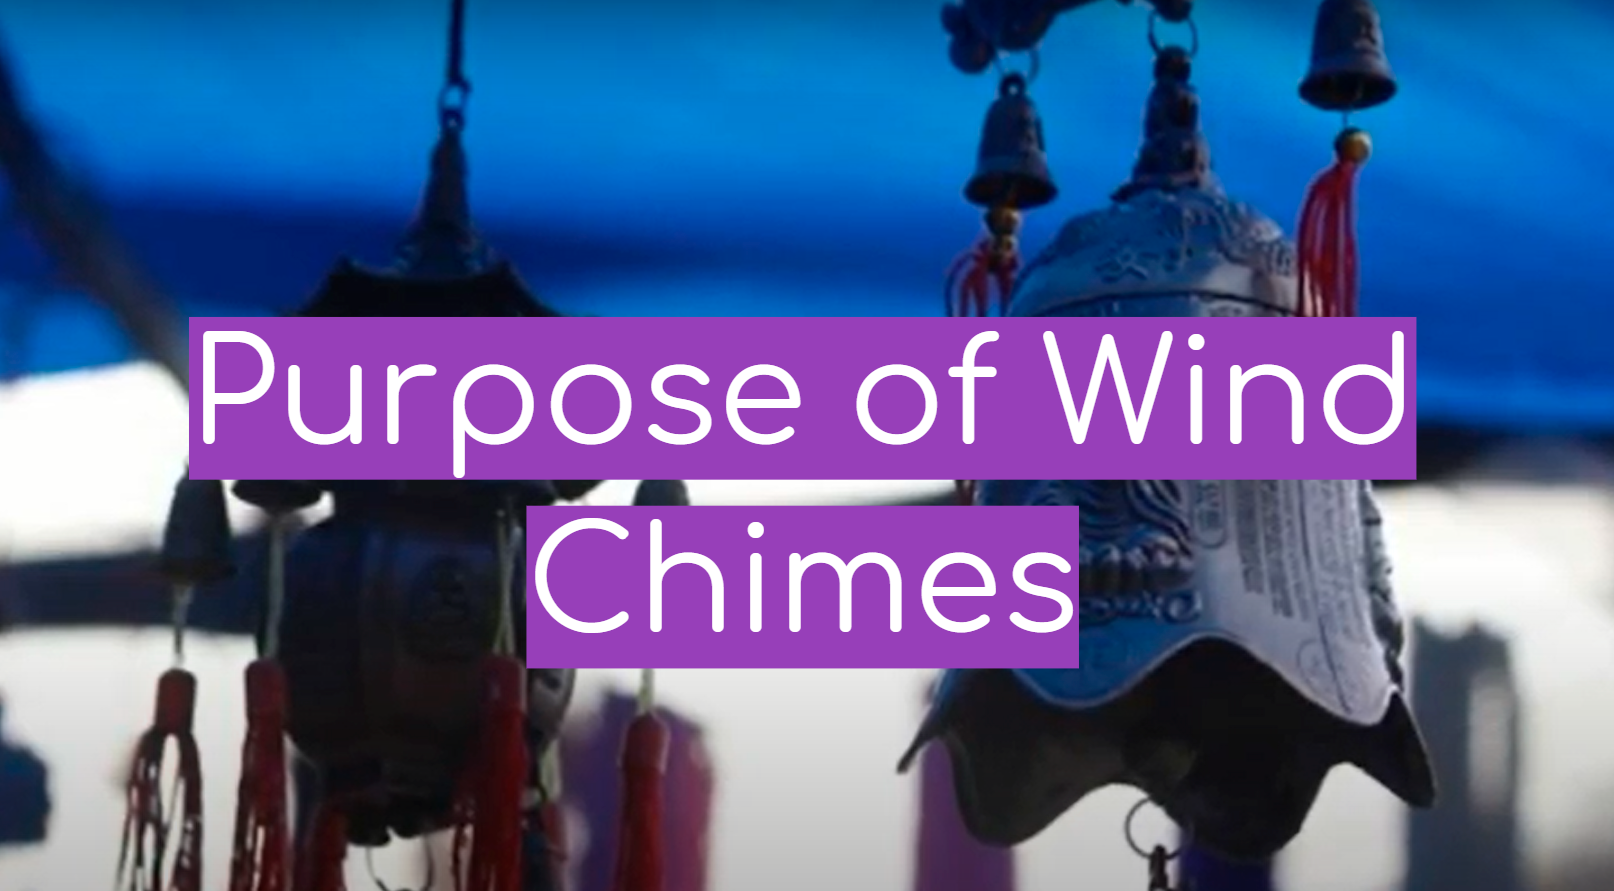 Purpose of Wind Chimes